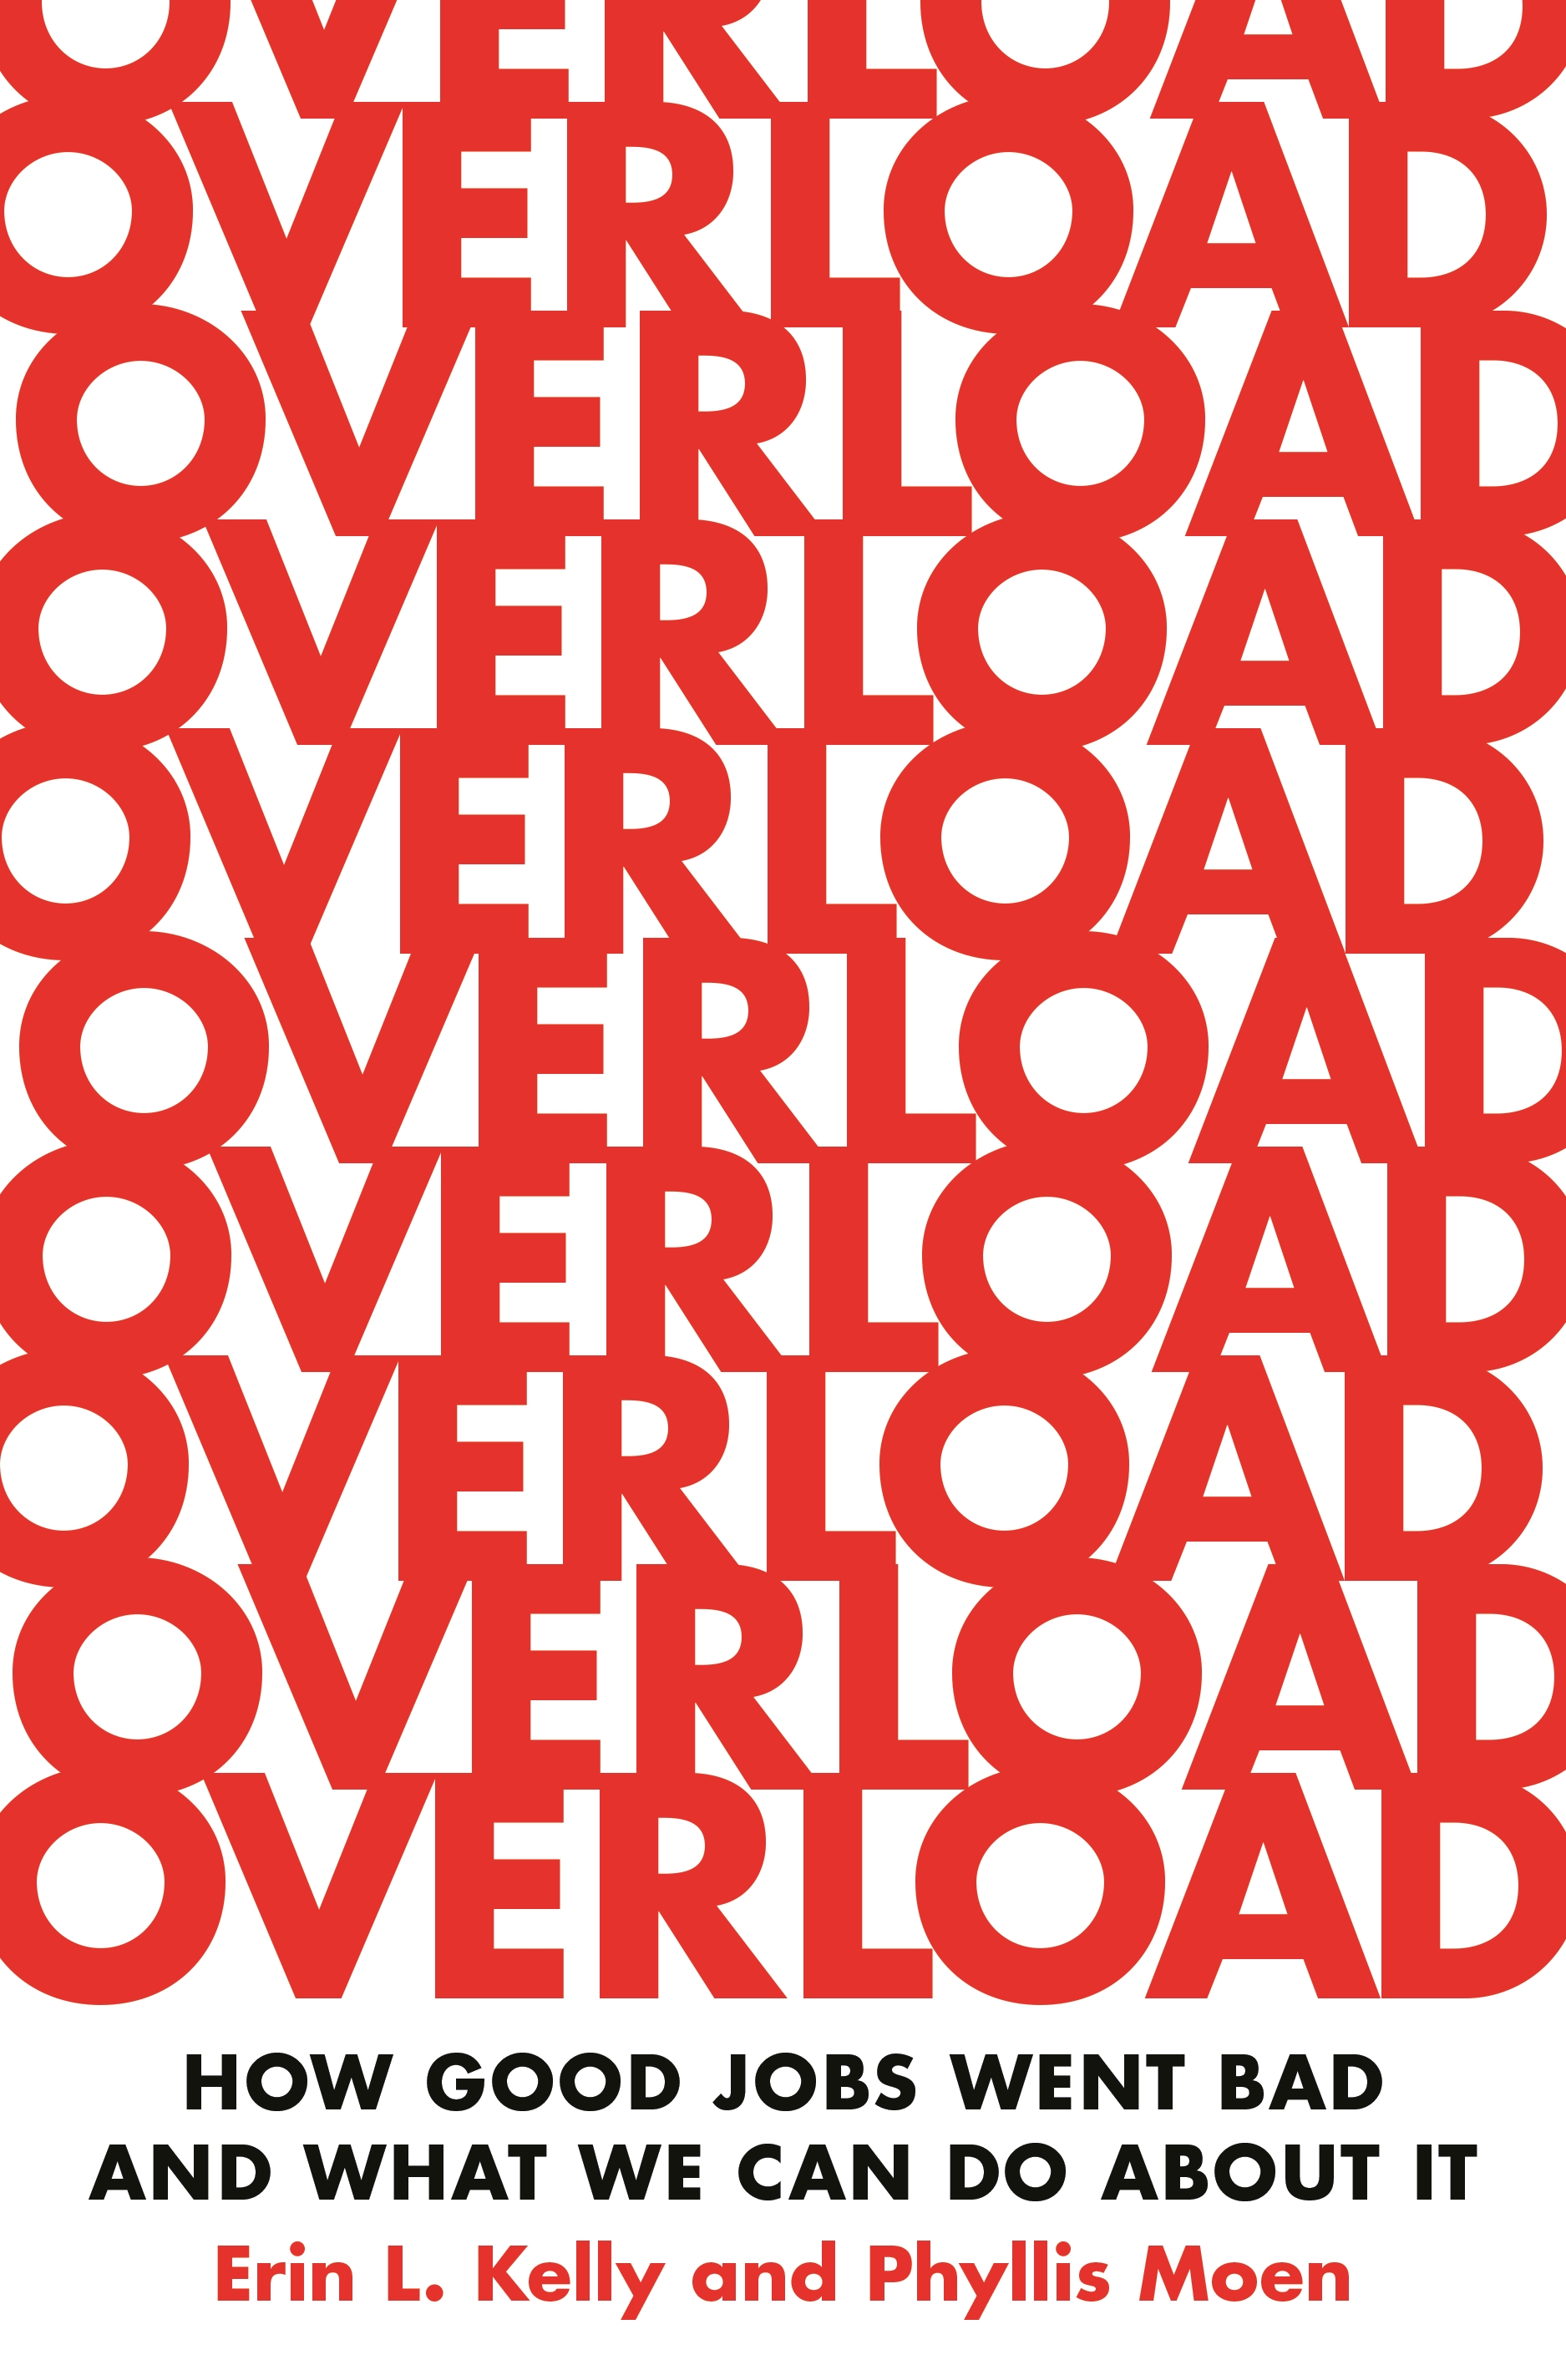 Over load